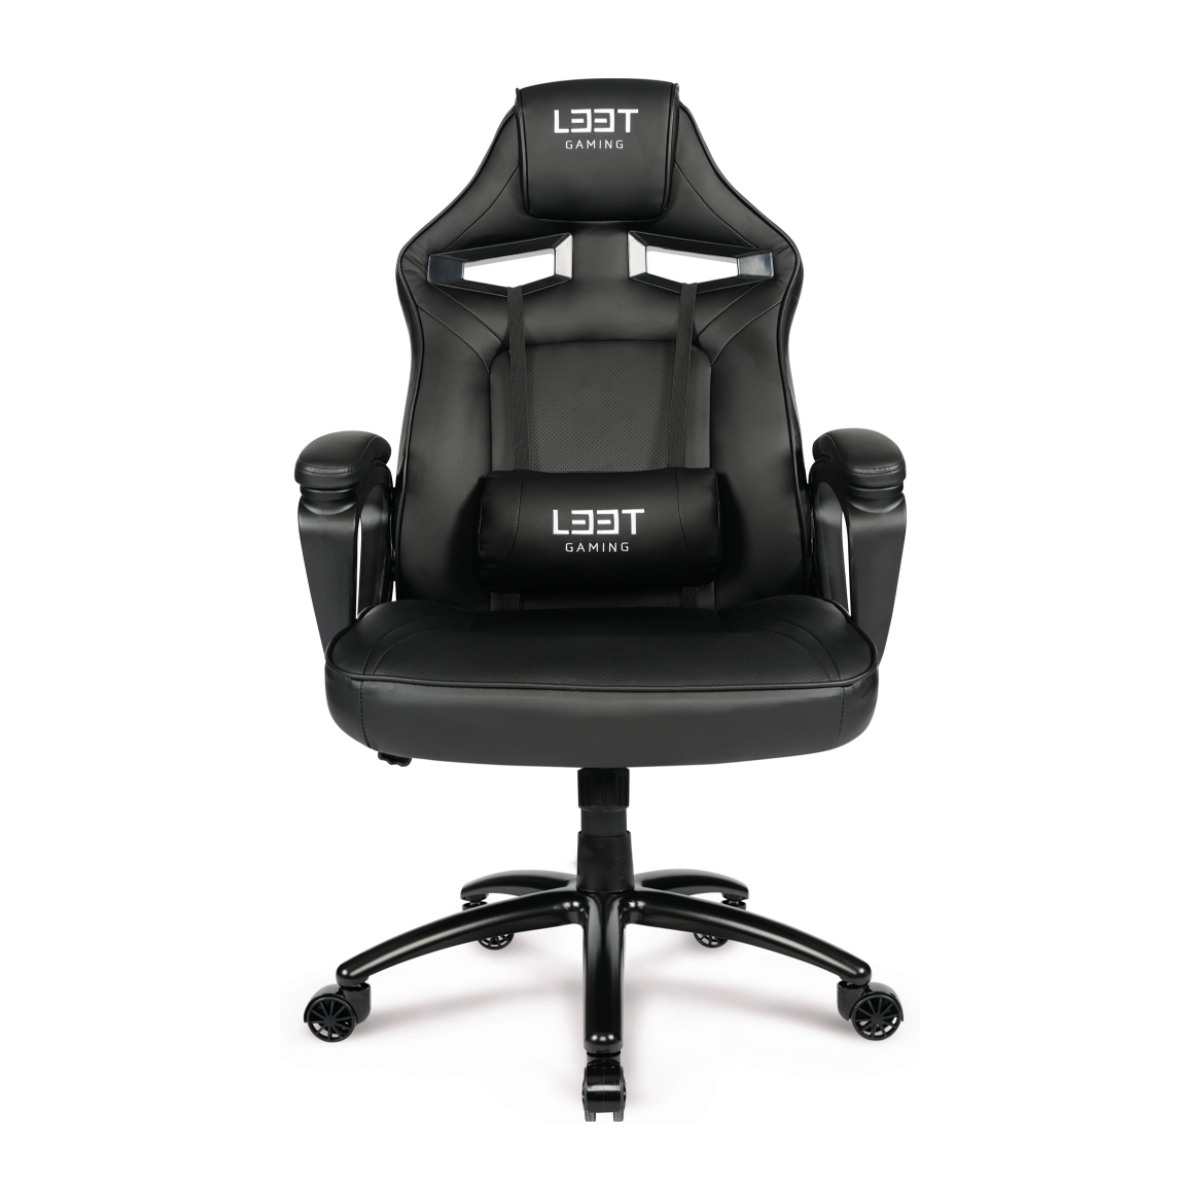 L33T EXTREME GAMING CHAIR BLACK Power.fi